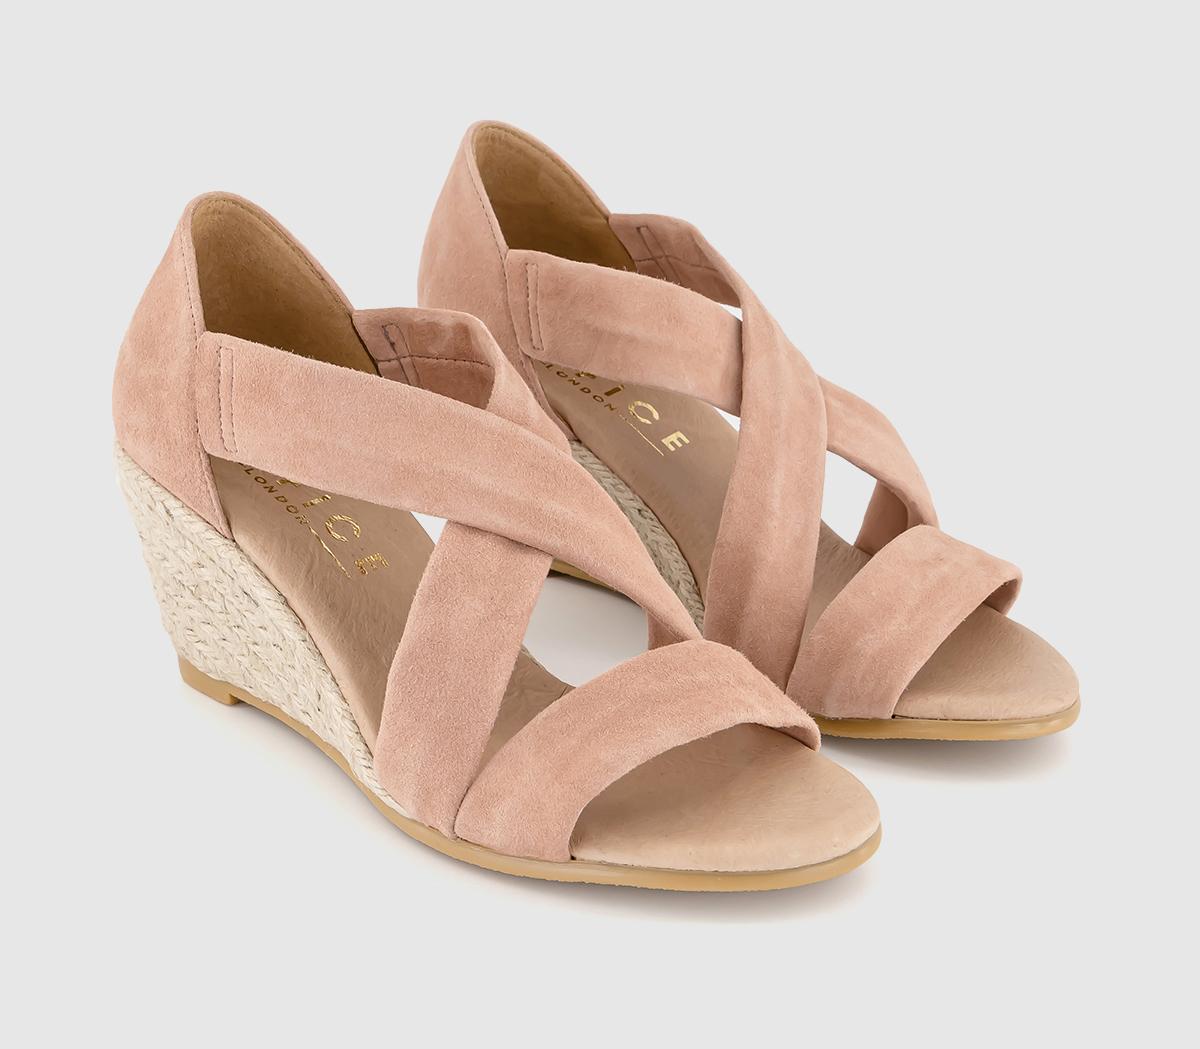 OFFICE Womens Women’s Pink Suede Nude Maiden Cross Strap Wedge Sandals, Size: 6